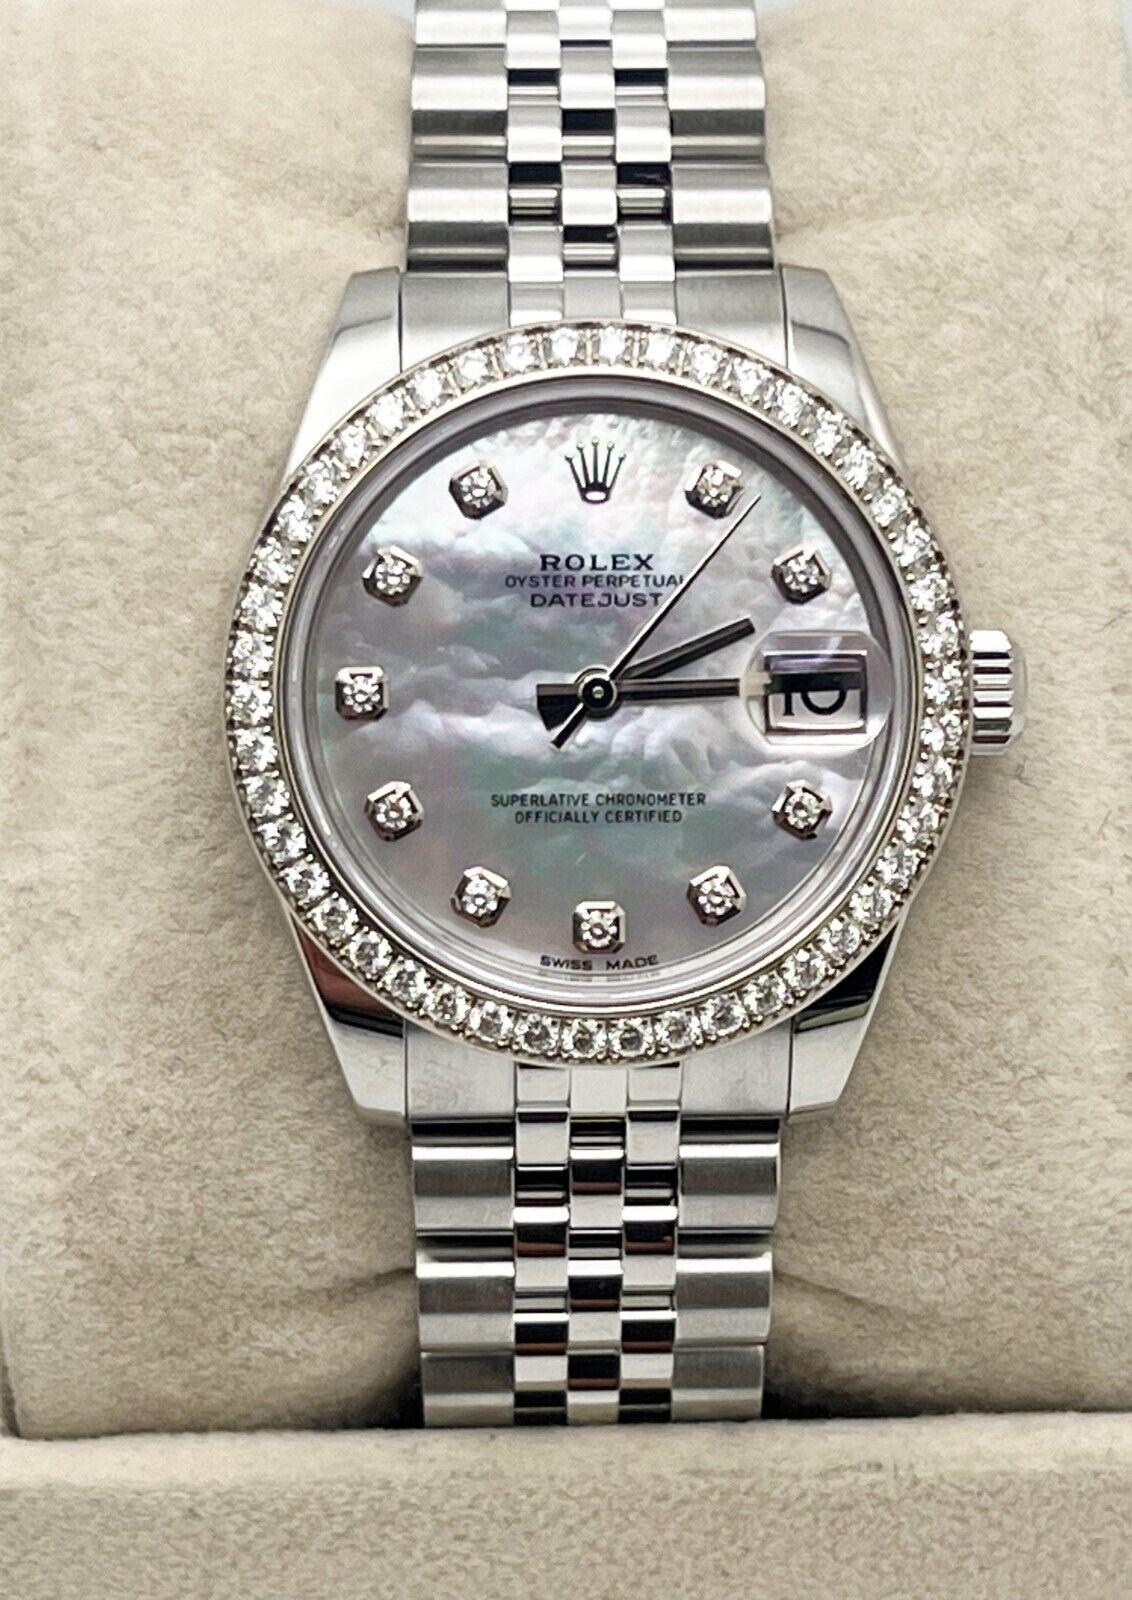 Style Number: 178384

Serial: SU685***

Year: 2010 - Now

Model: Datejust 31

Case Material: Stainless Steel

Band: Stainless Steel

Bezel: Factory Diamond Bezel

Dial: Factory Mother of Pearl Diamond Dial

Face: Sapphire Crystal

Case Size: